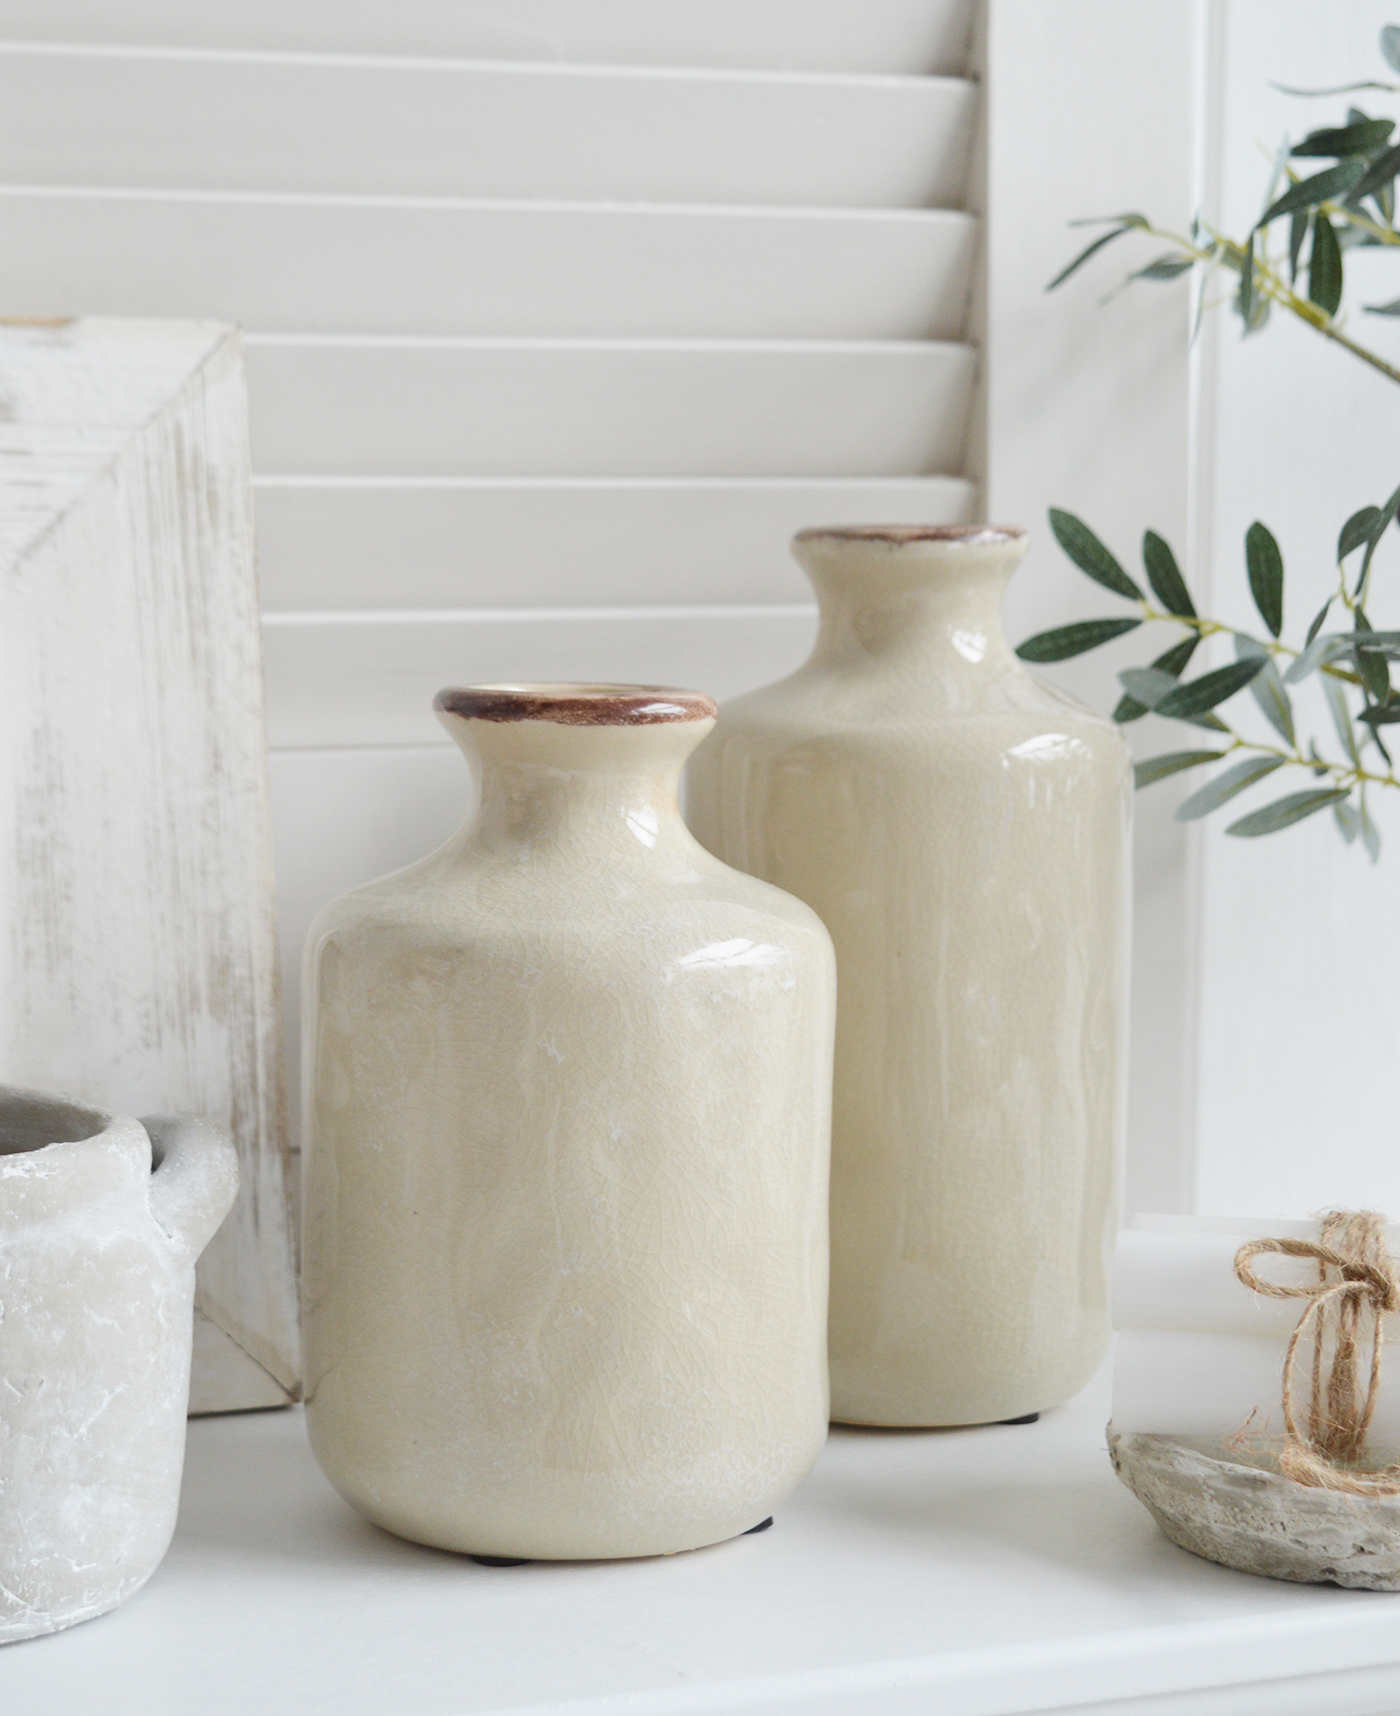 Fremont Vases - Natural coloured vase for styling New England, country and coastal homes and interiors 